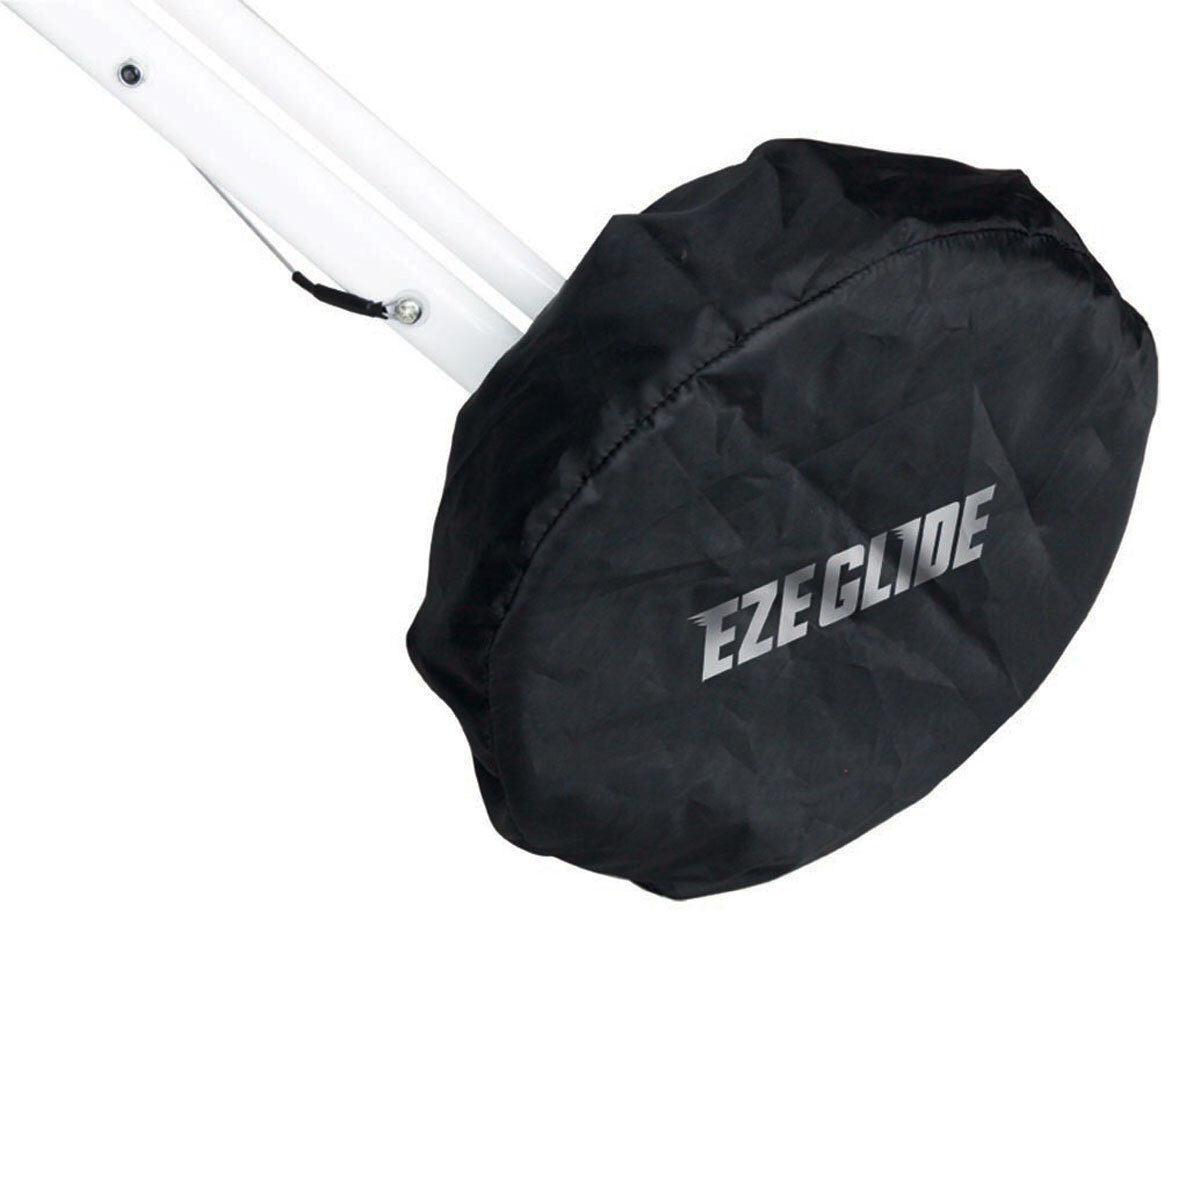 Ezeglide Smart Fold Trolley with Wheel cover and Umbrella